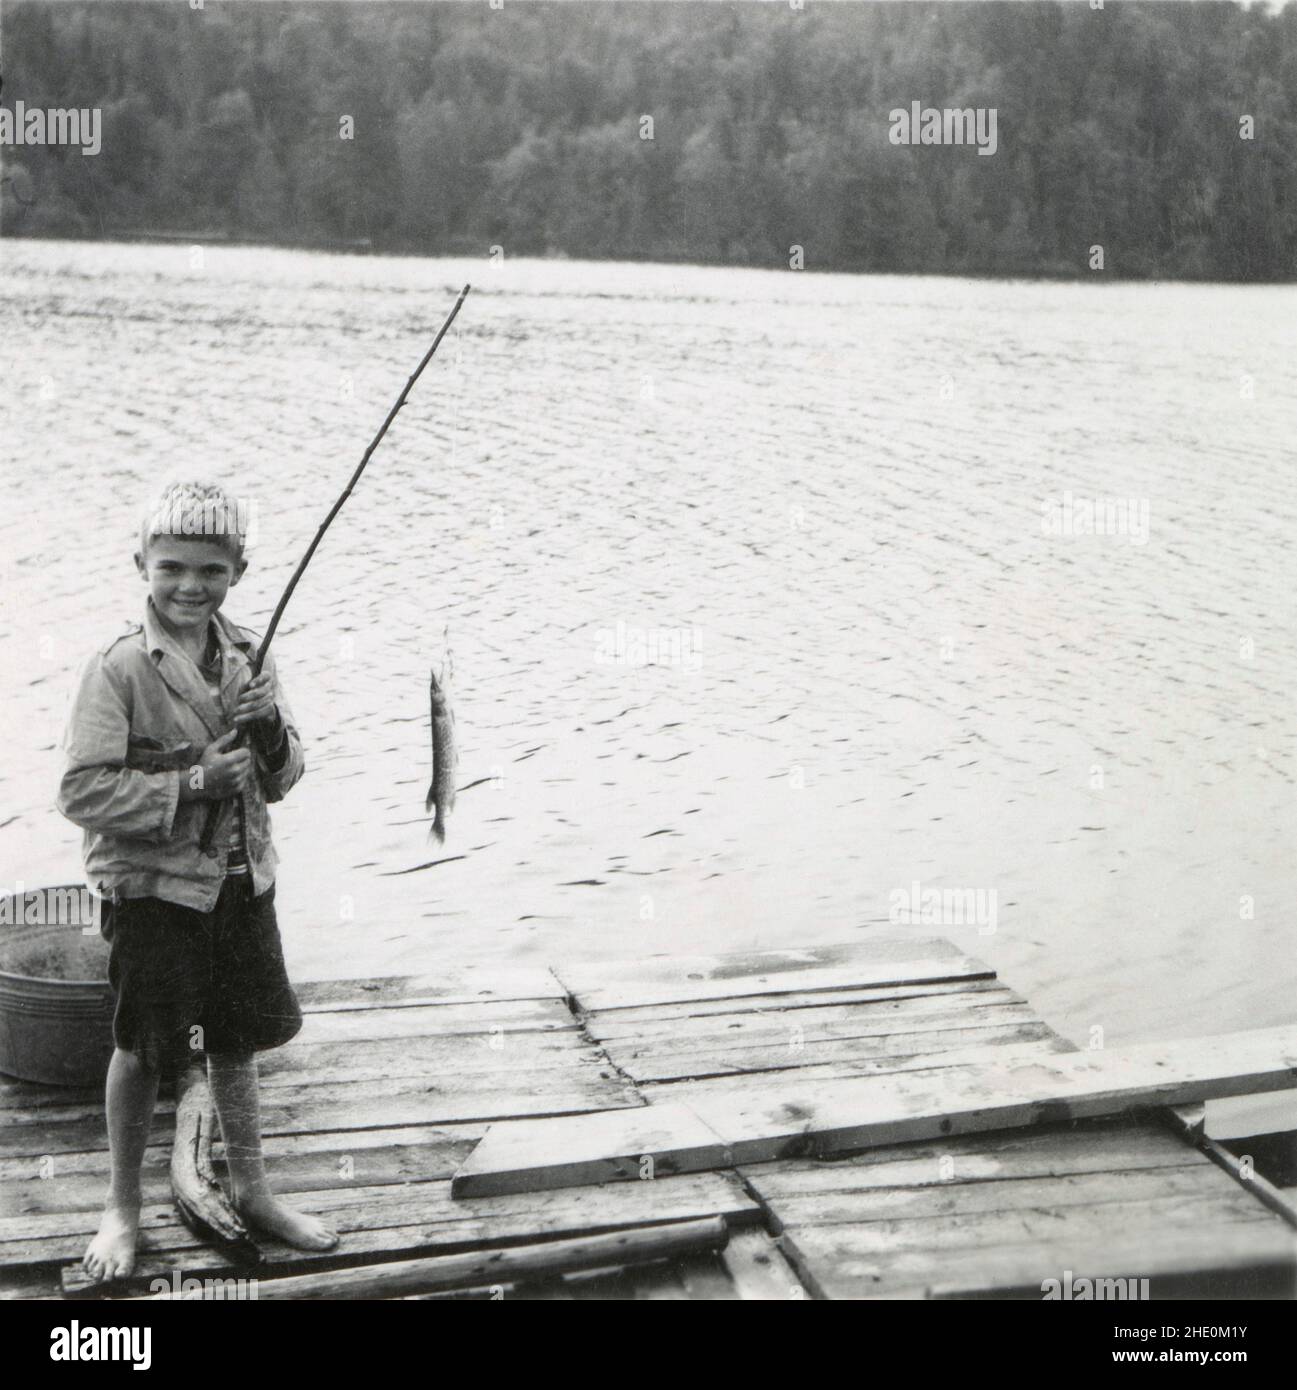 Antique circa 1930 photograph, boy with stick fishing pole on dock with fish.  Exact location unknown, USA. SOURCE: ORIGINAL PHOTOGRAPH Stock Photo - Alamy